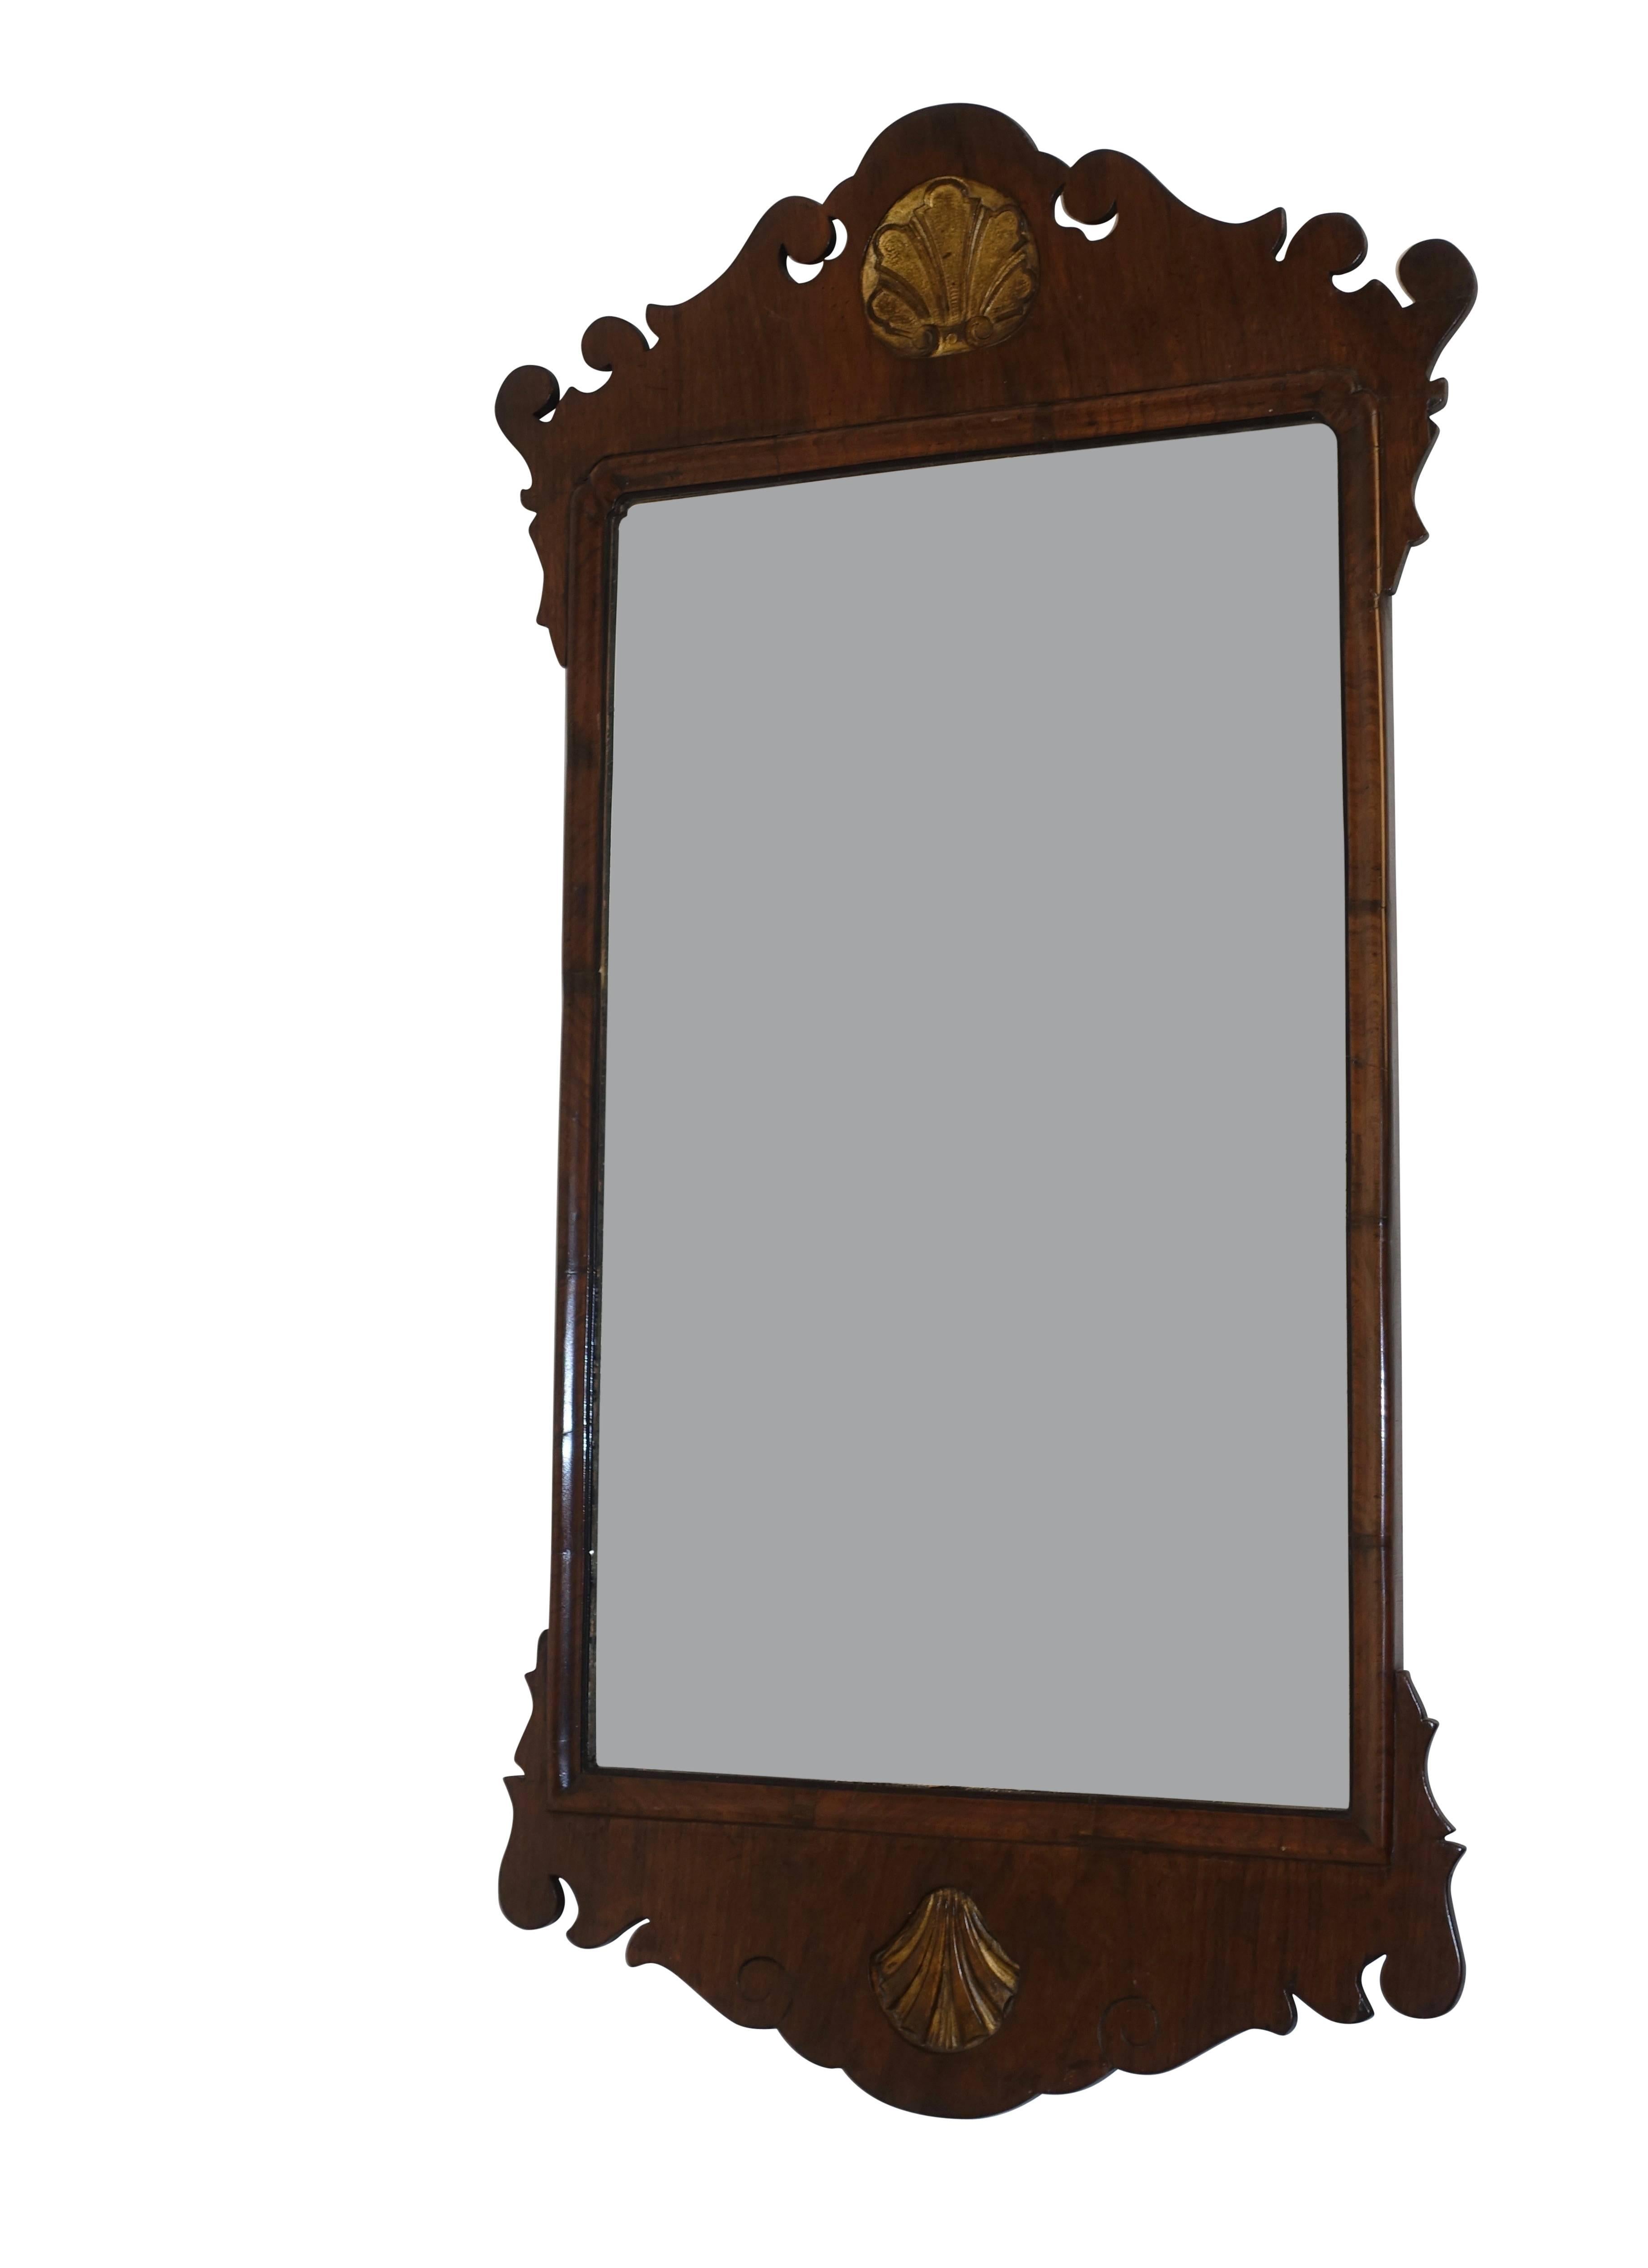 A George III carved walnut mirror having a carved and gilt stylized shell design at the top and bottom, England, circa 1800. 
Old mirror shows some expected light and minor spotting.